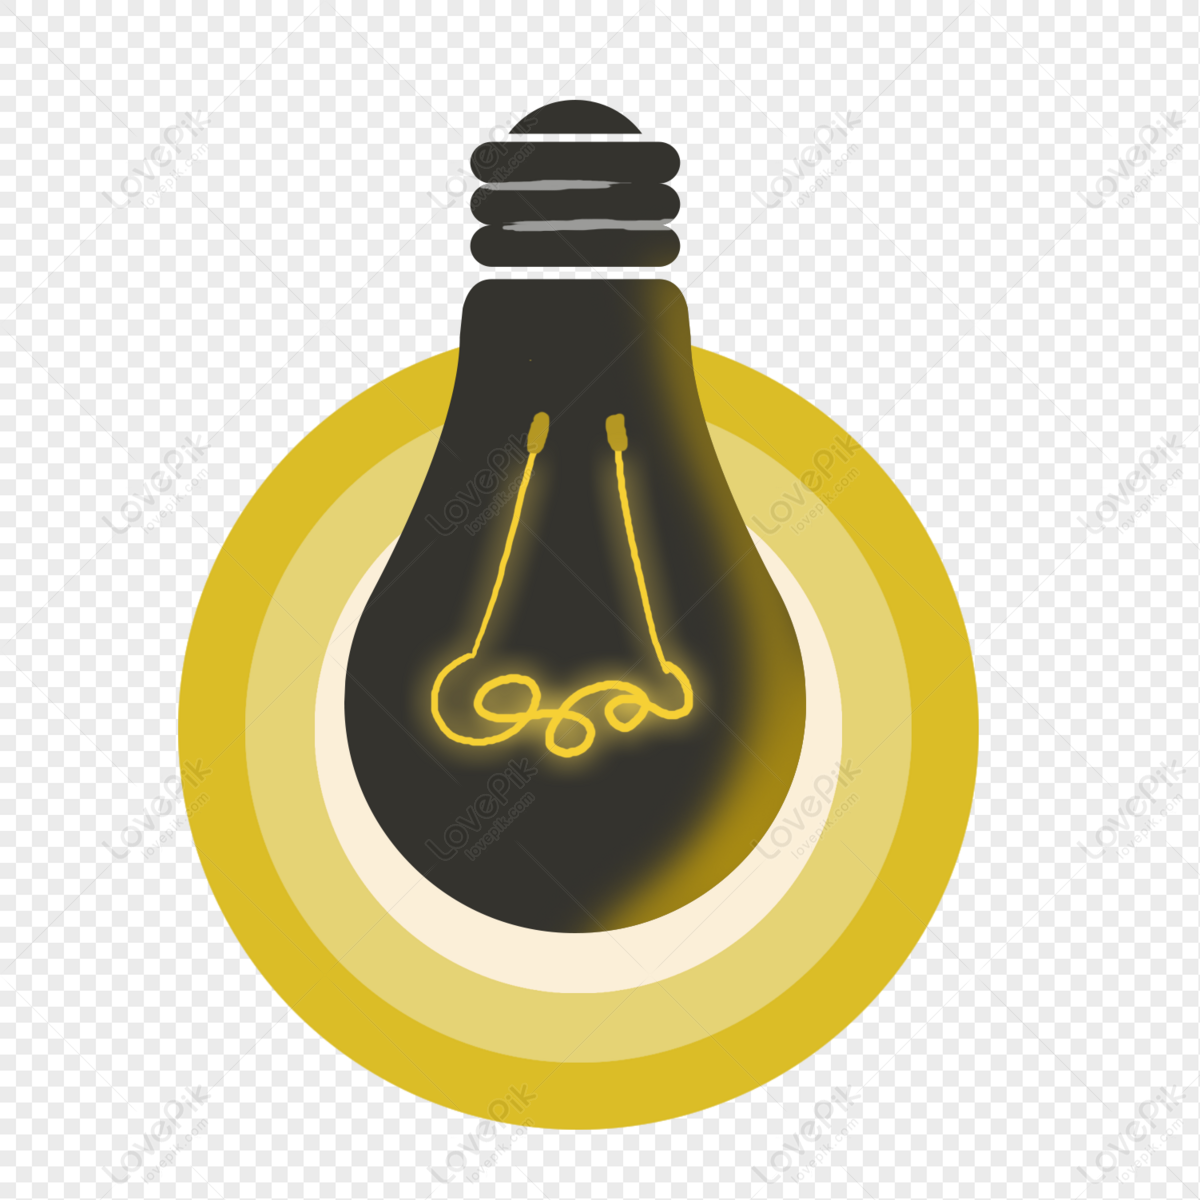 Cartoon Glowing Light Bulb PNG Image Free Download And Clipart Image For  Free Download - Lovepik | 401555531